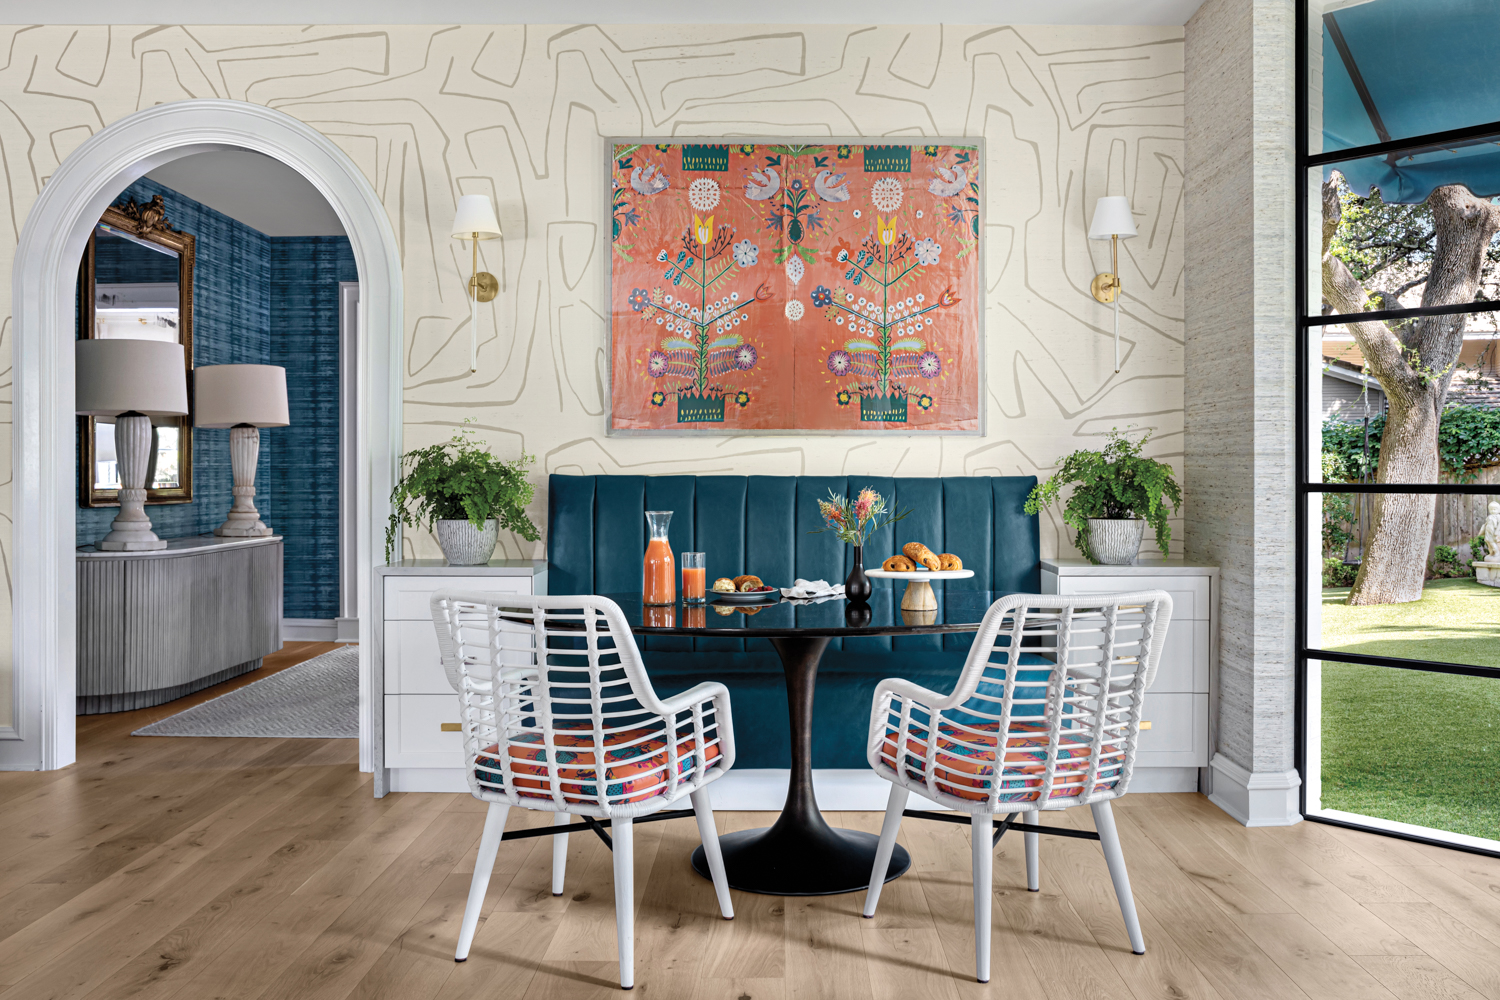 Geometric wallpaper and blue banquette in breakfast nook by Texas female design pro Anna Grasso-Gay